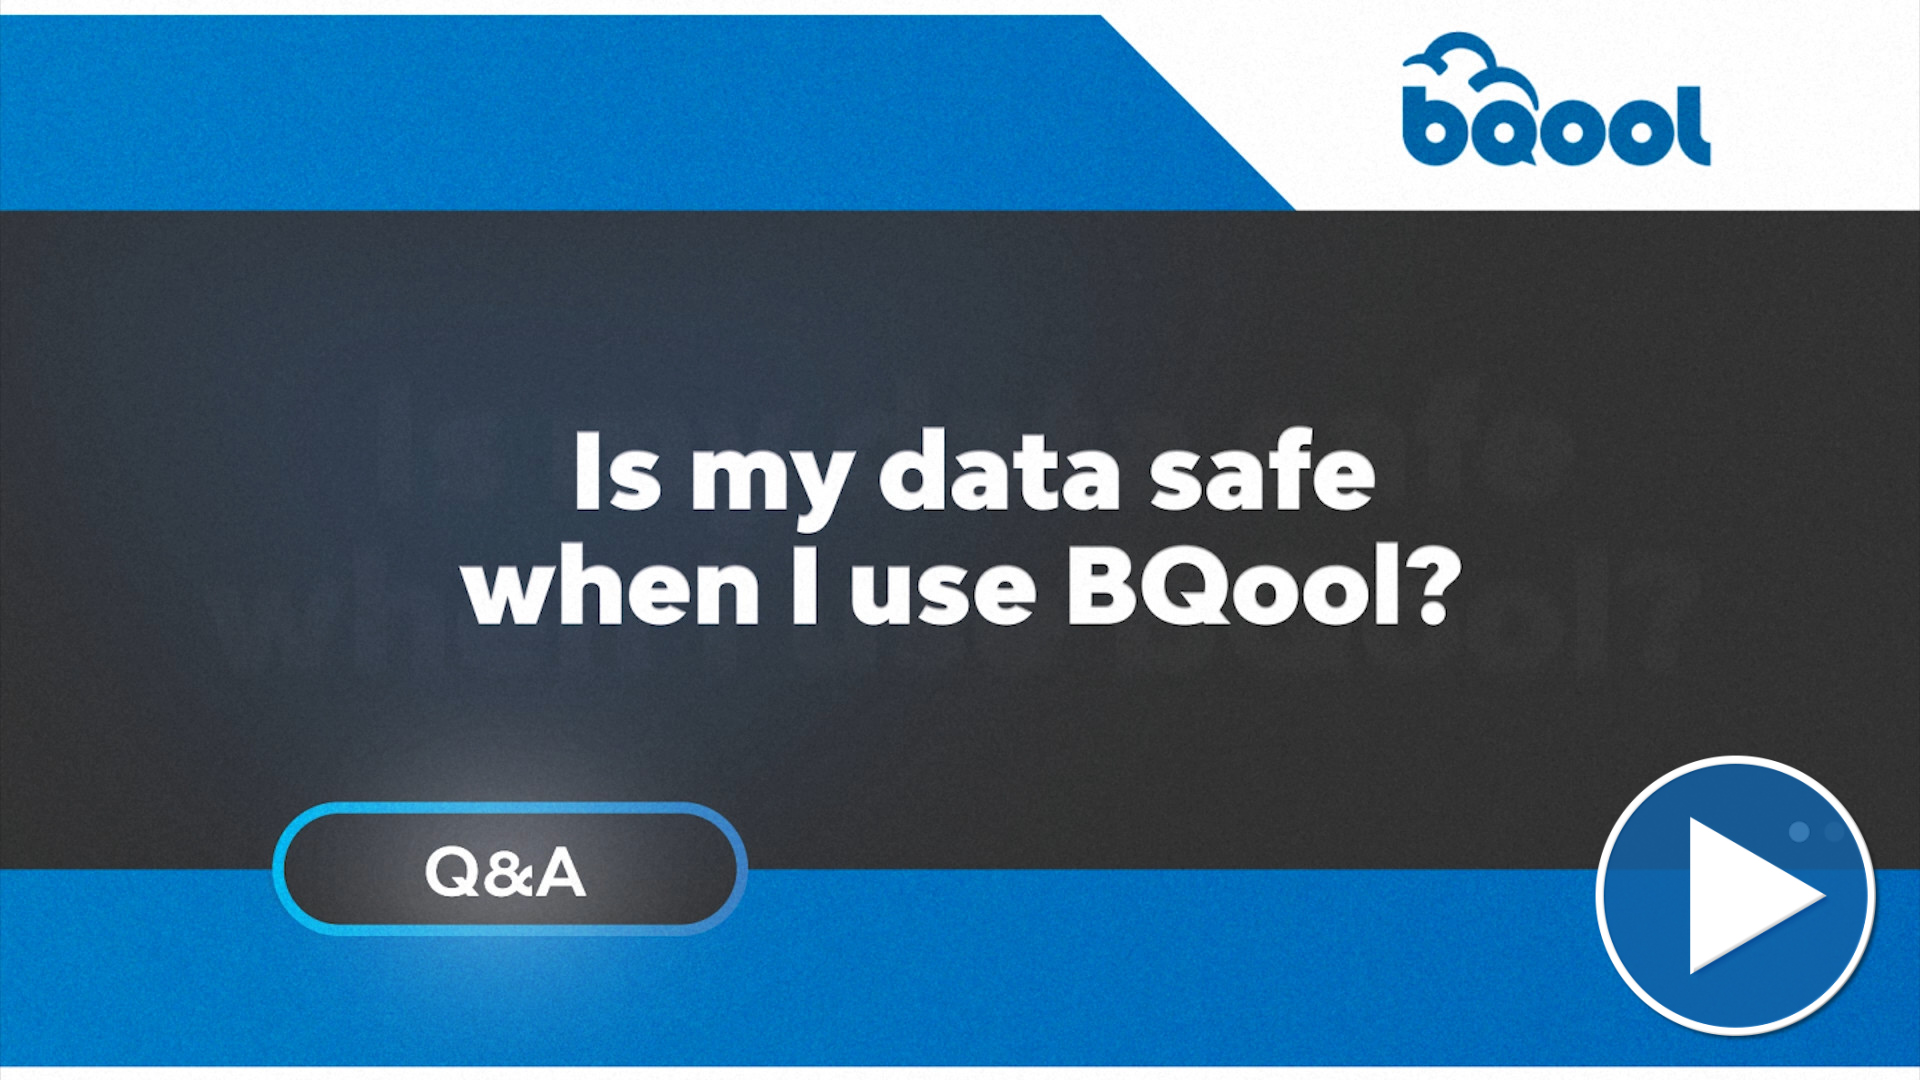 Q1_Is_my_data_safe_when_I_use_BQool_with_Button.jpg